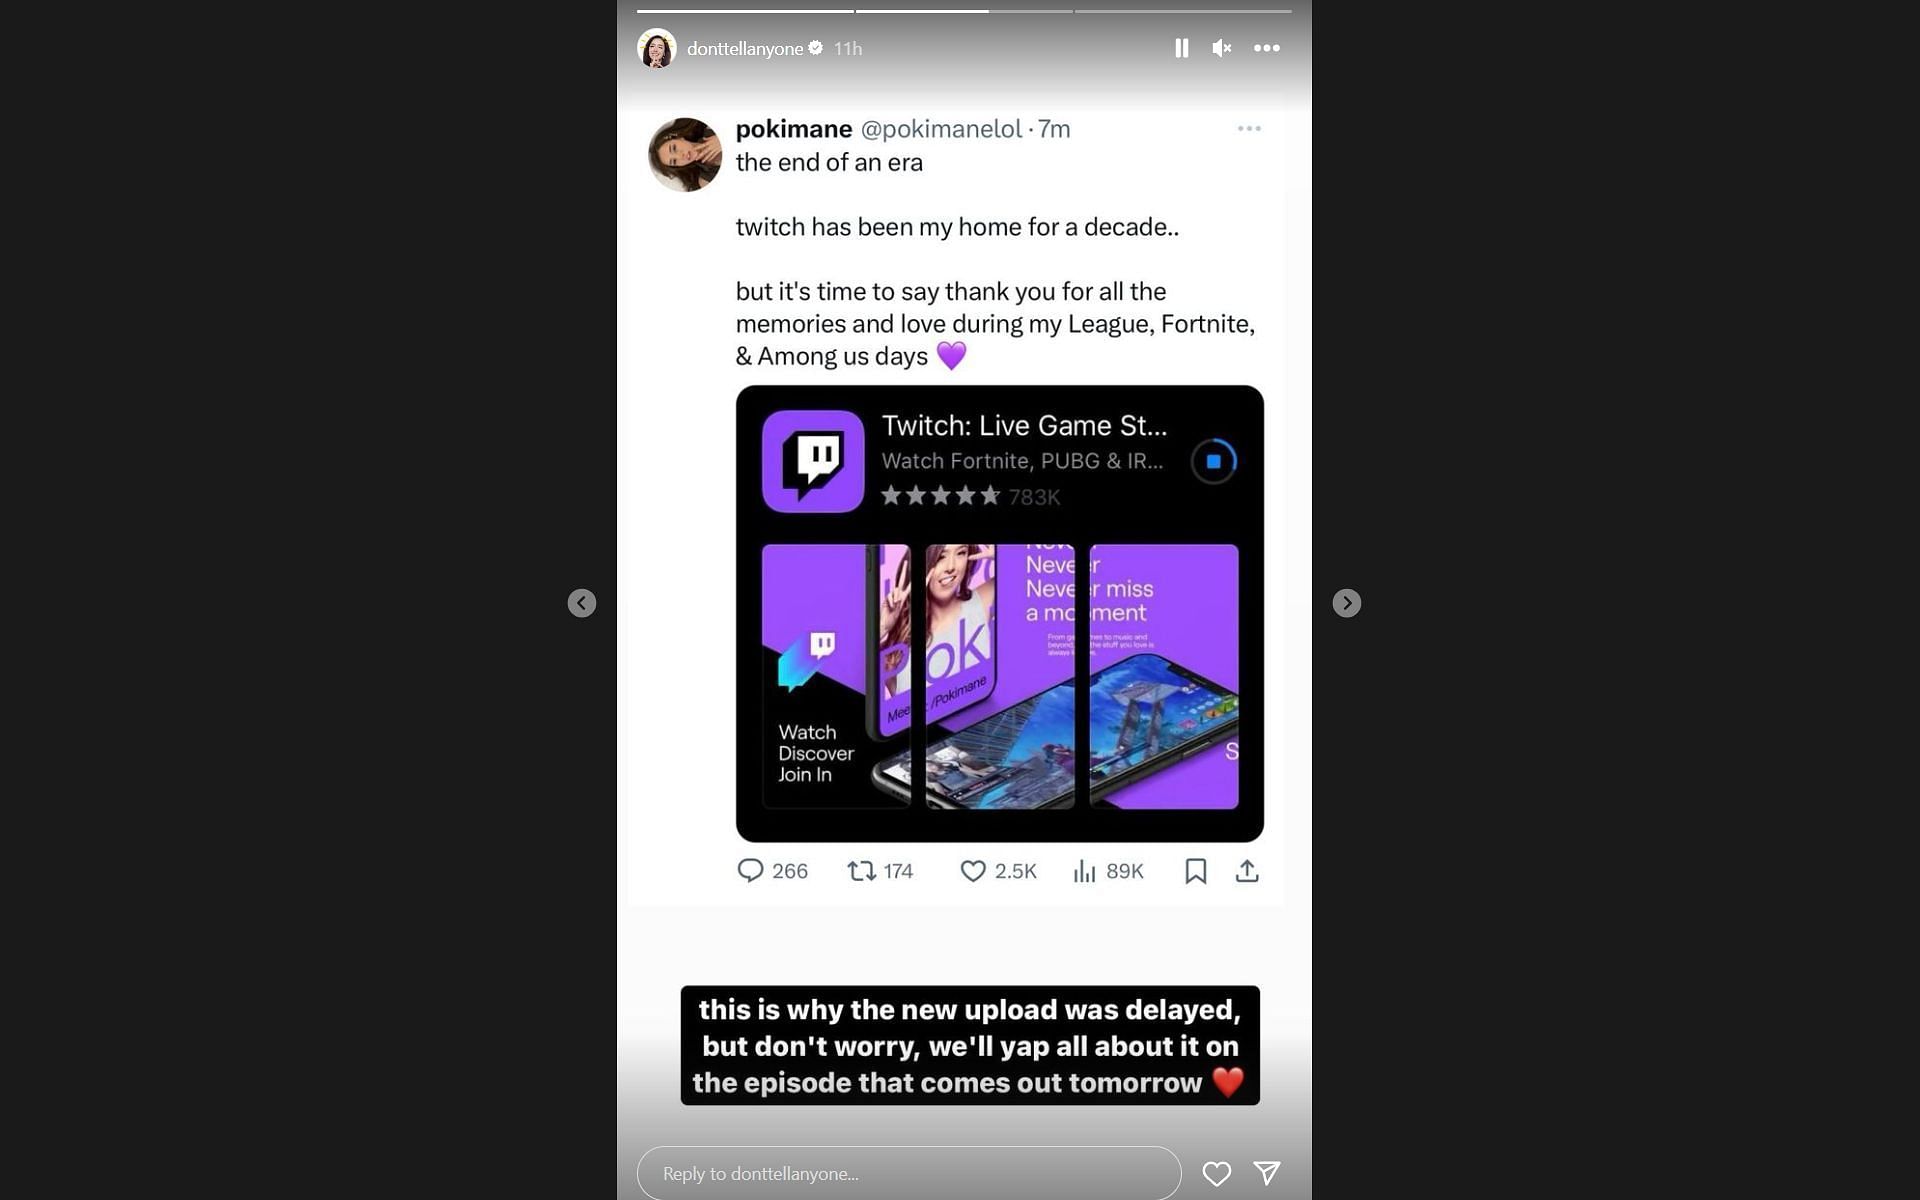 The Twitch streamer stated she would provide more details on her podcast (Image via donttellanyone/Instagram)